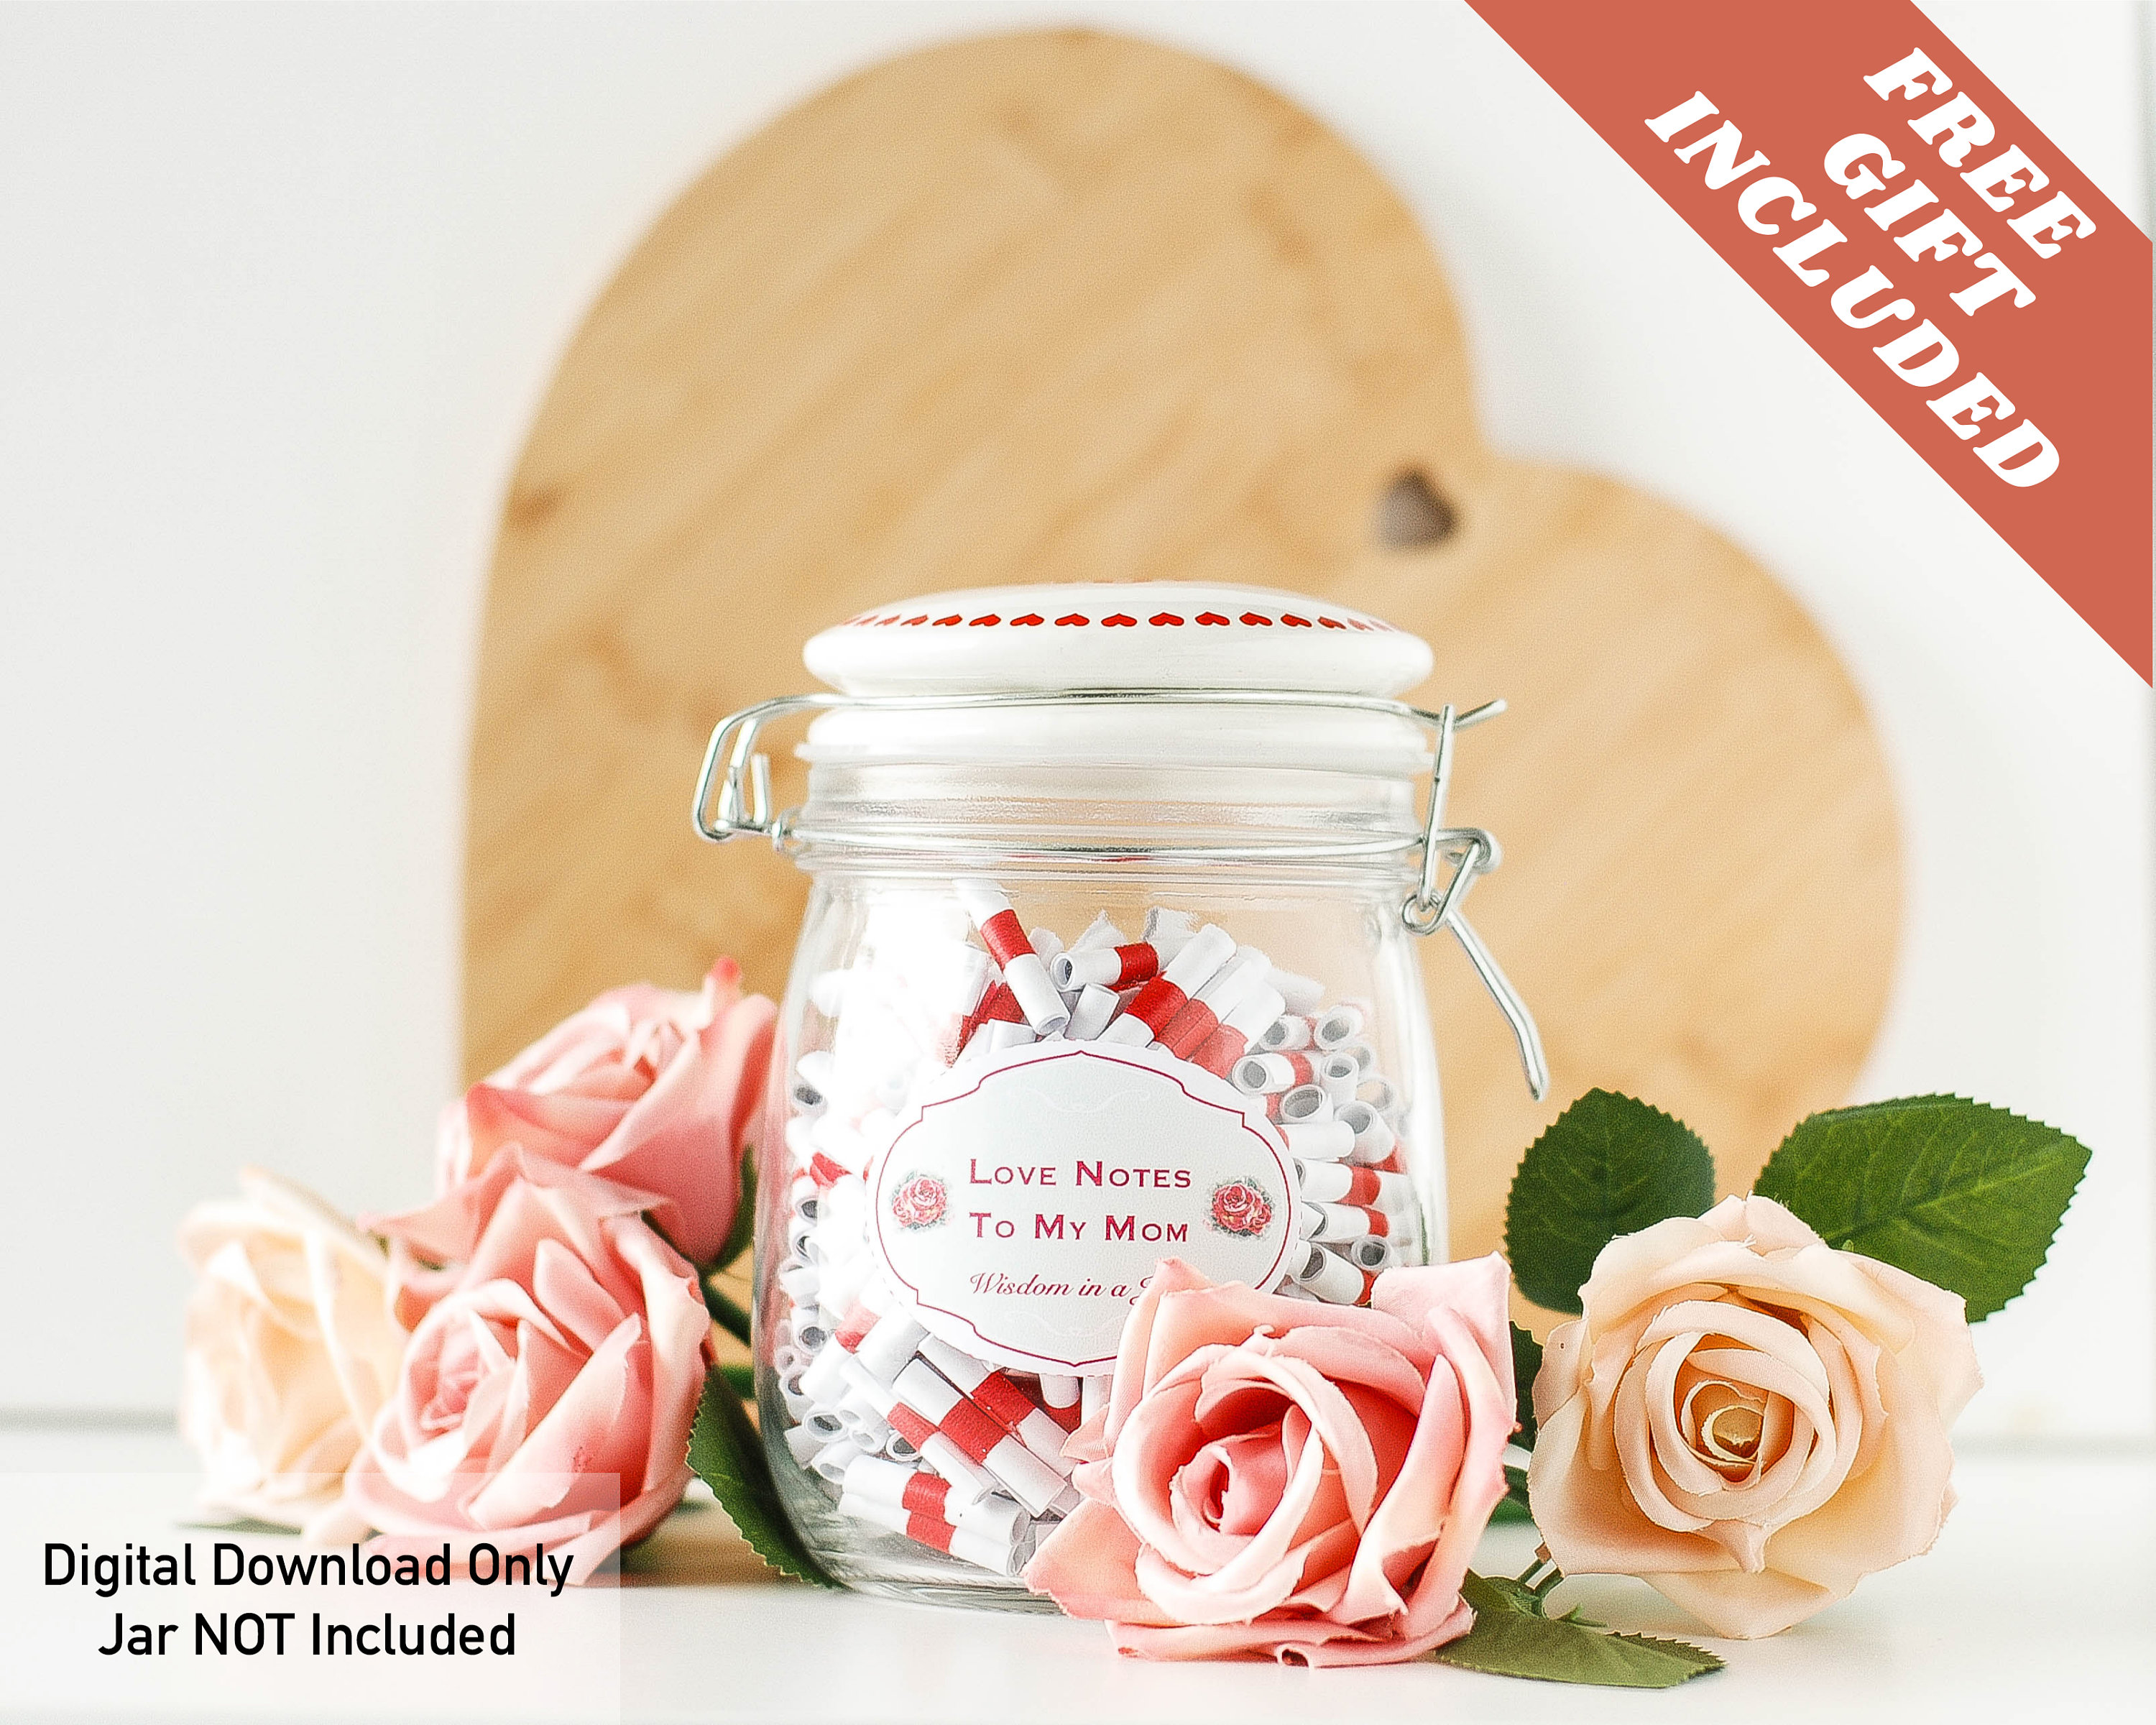 50+ Best Thoughtful Creative Mother's Day Gifts In A Jar  Creative  mother's day gifts, Mothersday gifts diy, Jar gifts